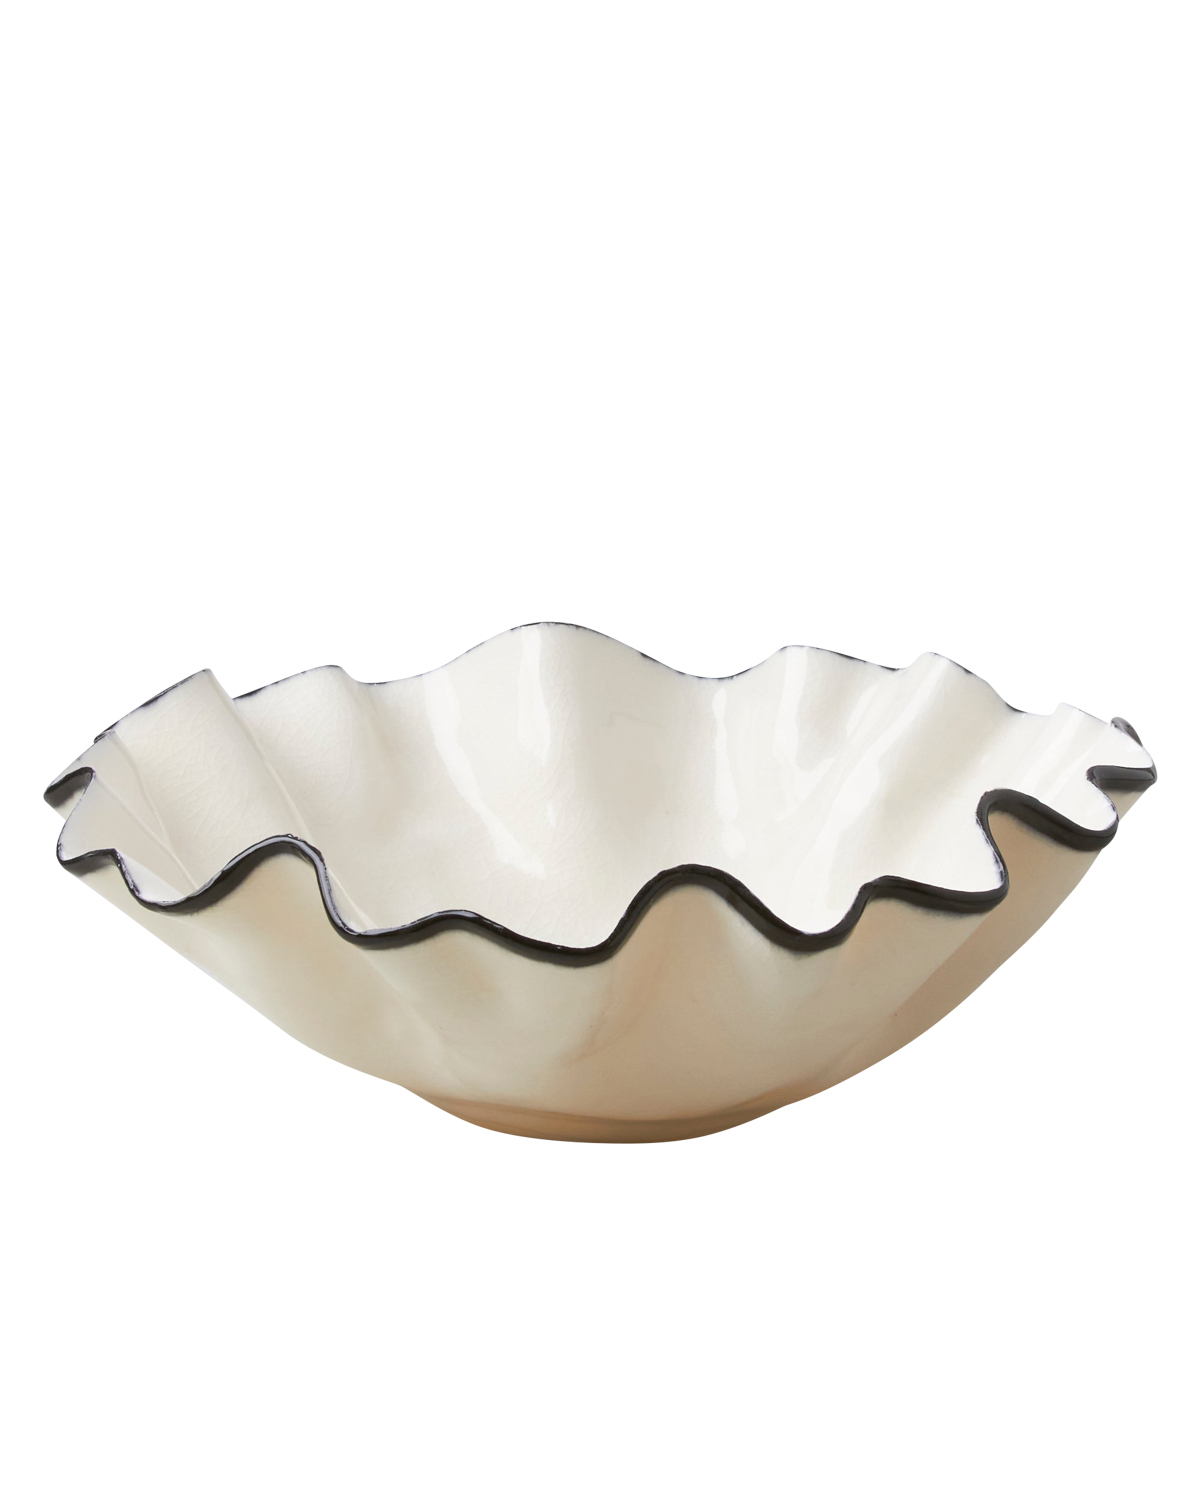 cream-colored bowl with black wavy edges